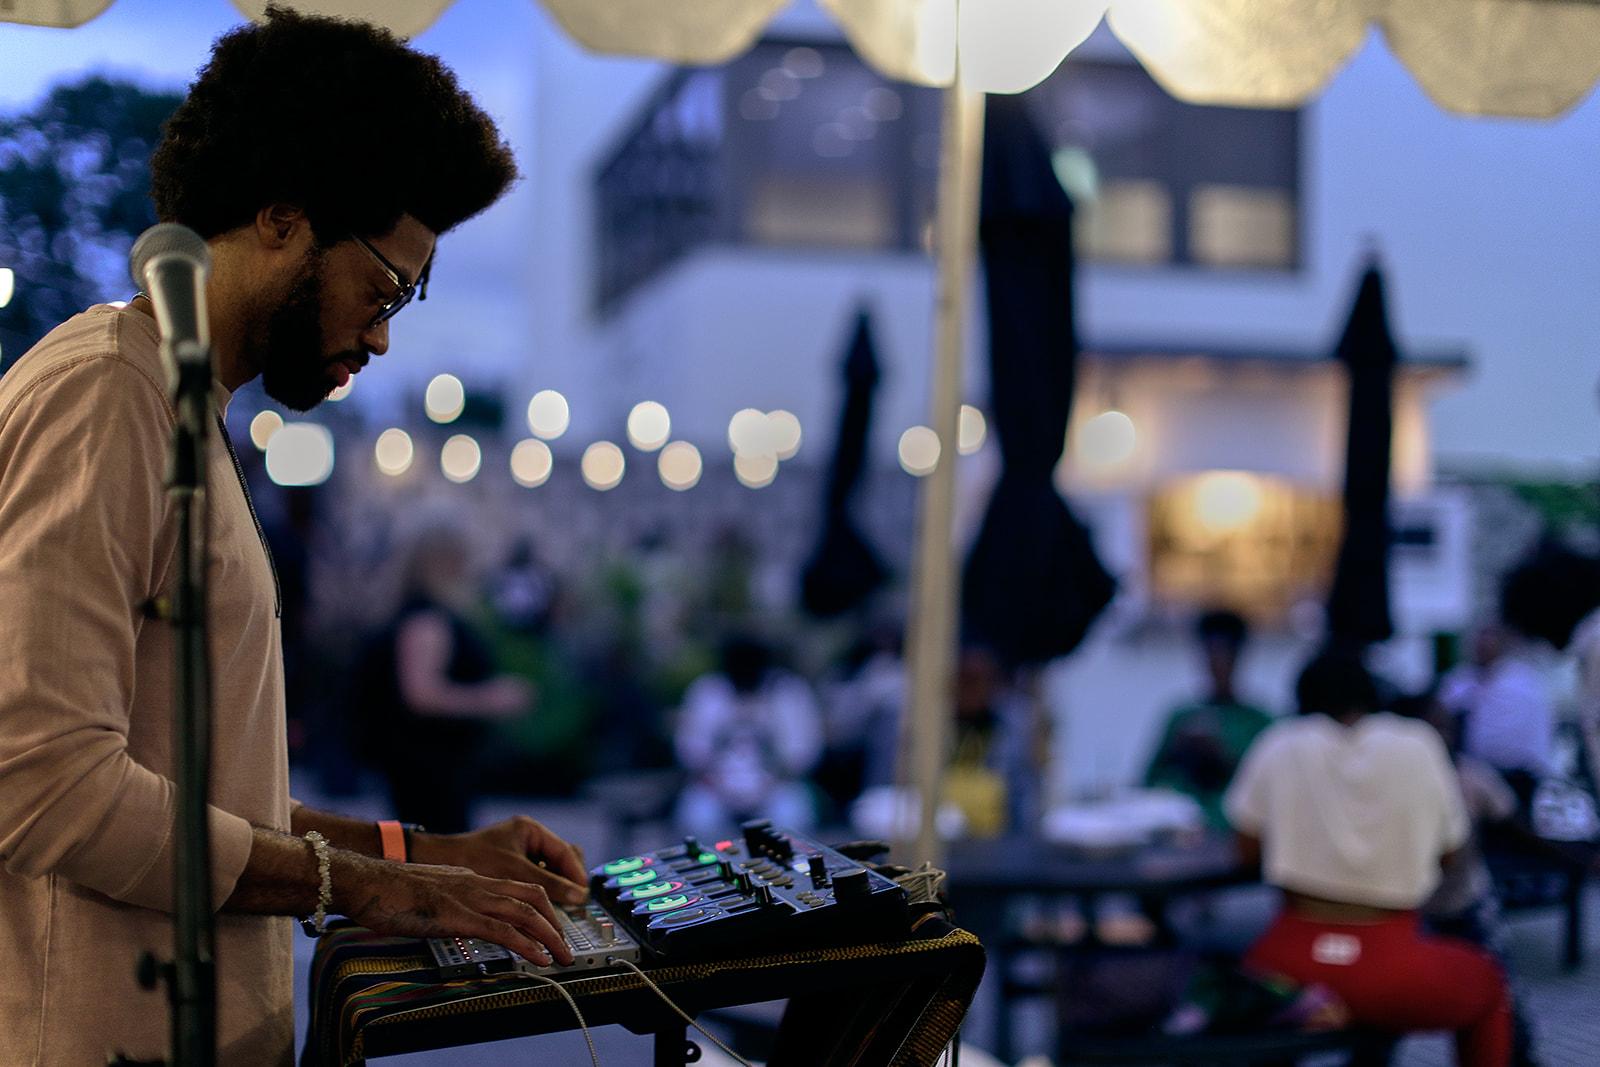 Three-quarter view of a man using a soundboard. In the background, groups of people gather at patio tables.